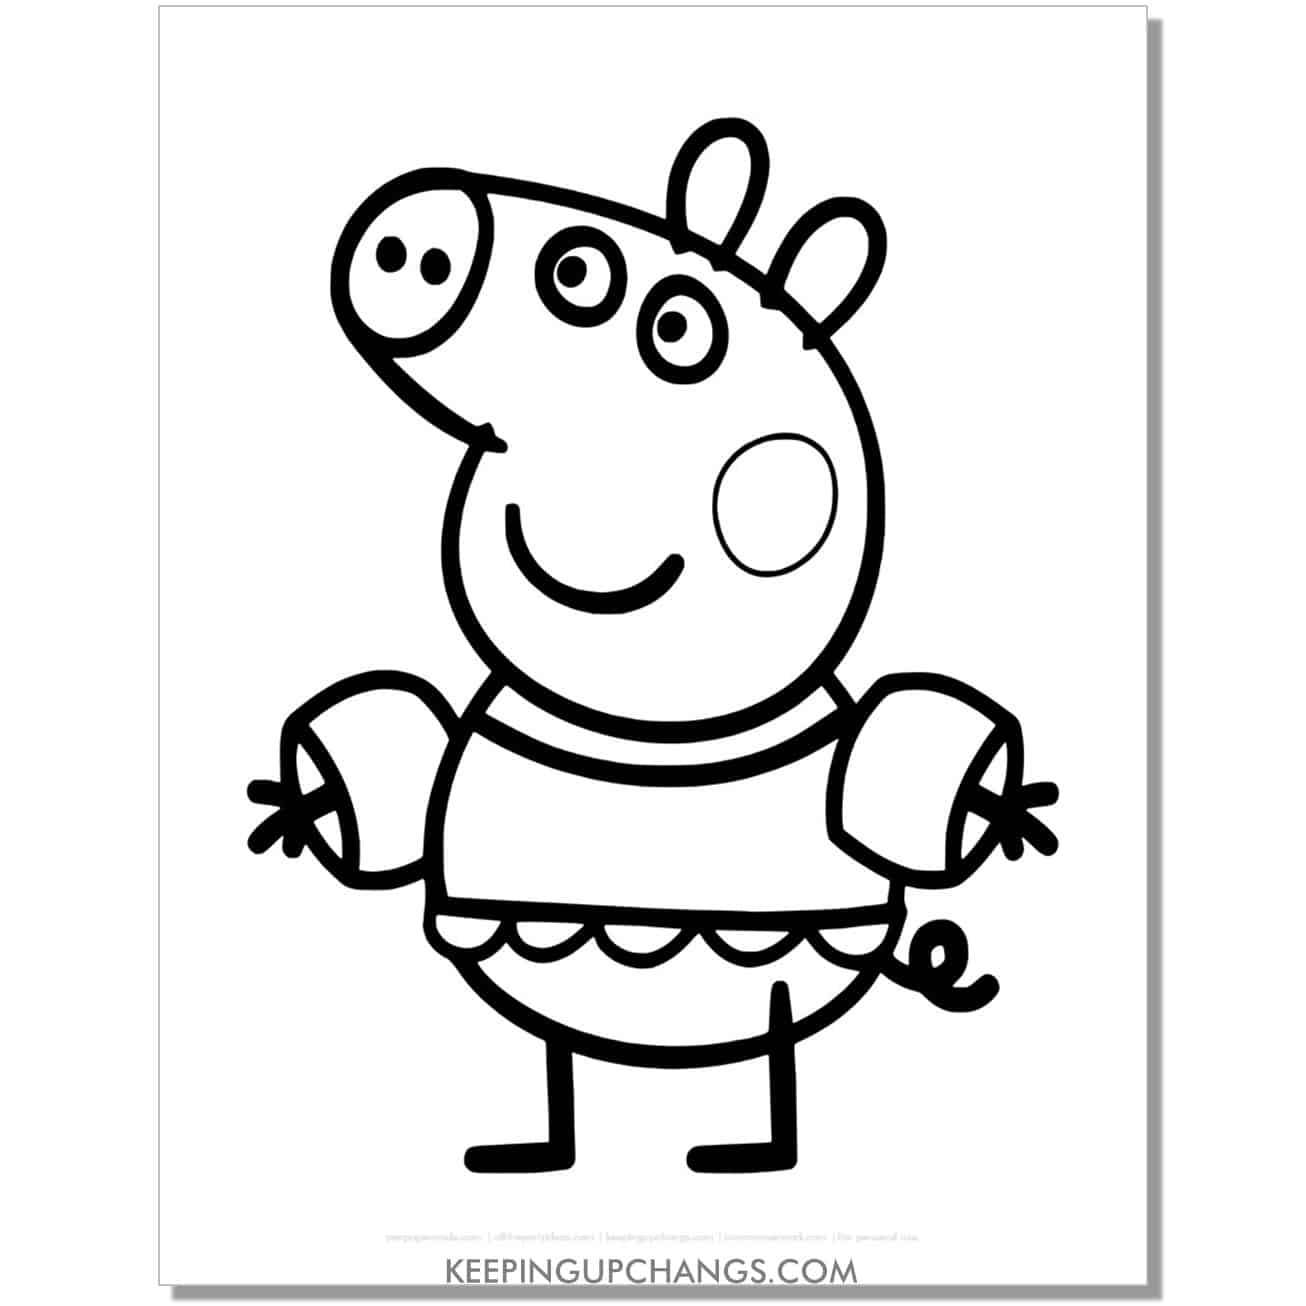 free peppa pig with floatie armbands for swimming coloring page, sheet.